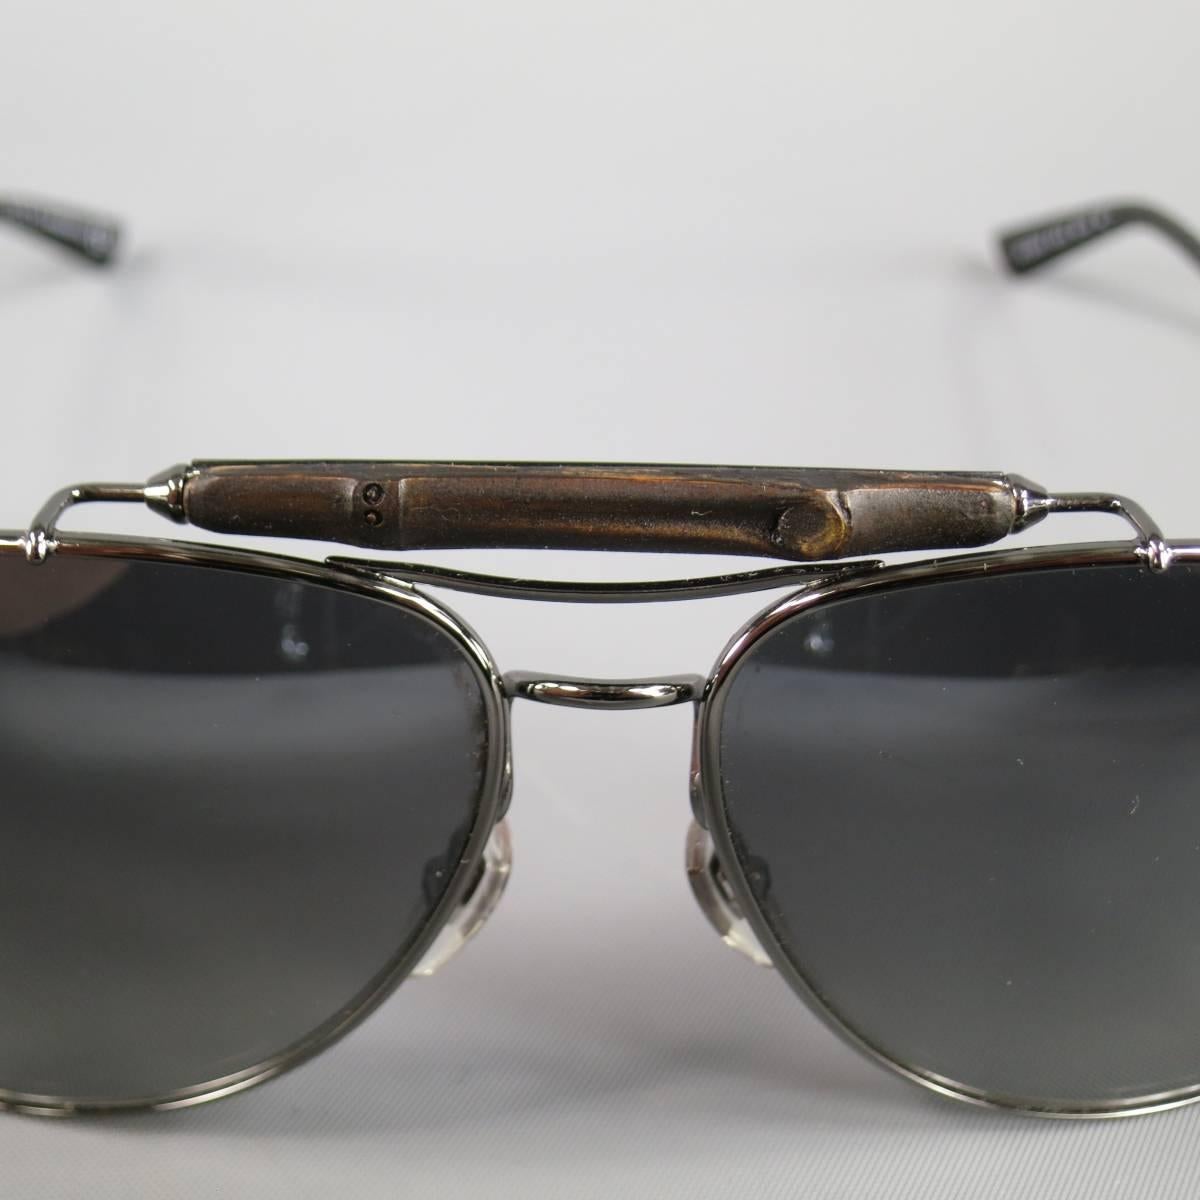 GUCCI Sunglasses consists of metal material in a silver color tone. Designed in classic aviator style, bamboo top brow bar and sleek temple tips. Comes with original casing. Made in Italy.
 
Excellent Pre-Owned Condition 
Marked Style: GG 2235/S
